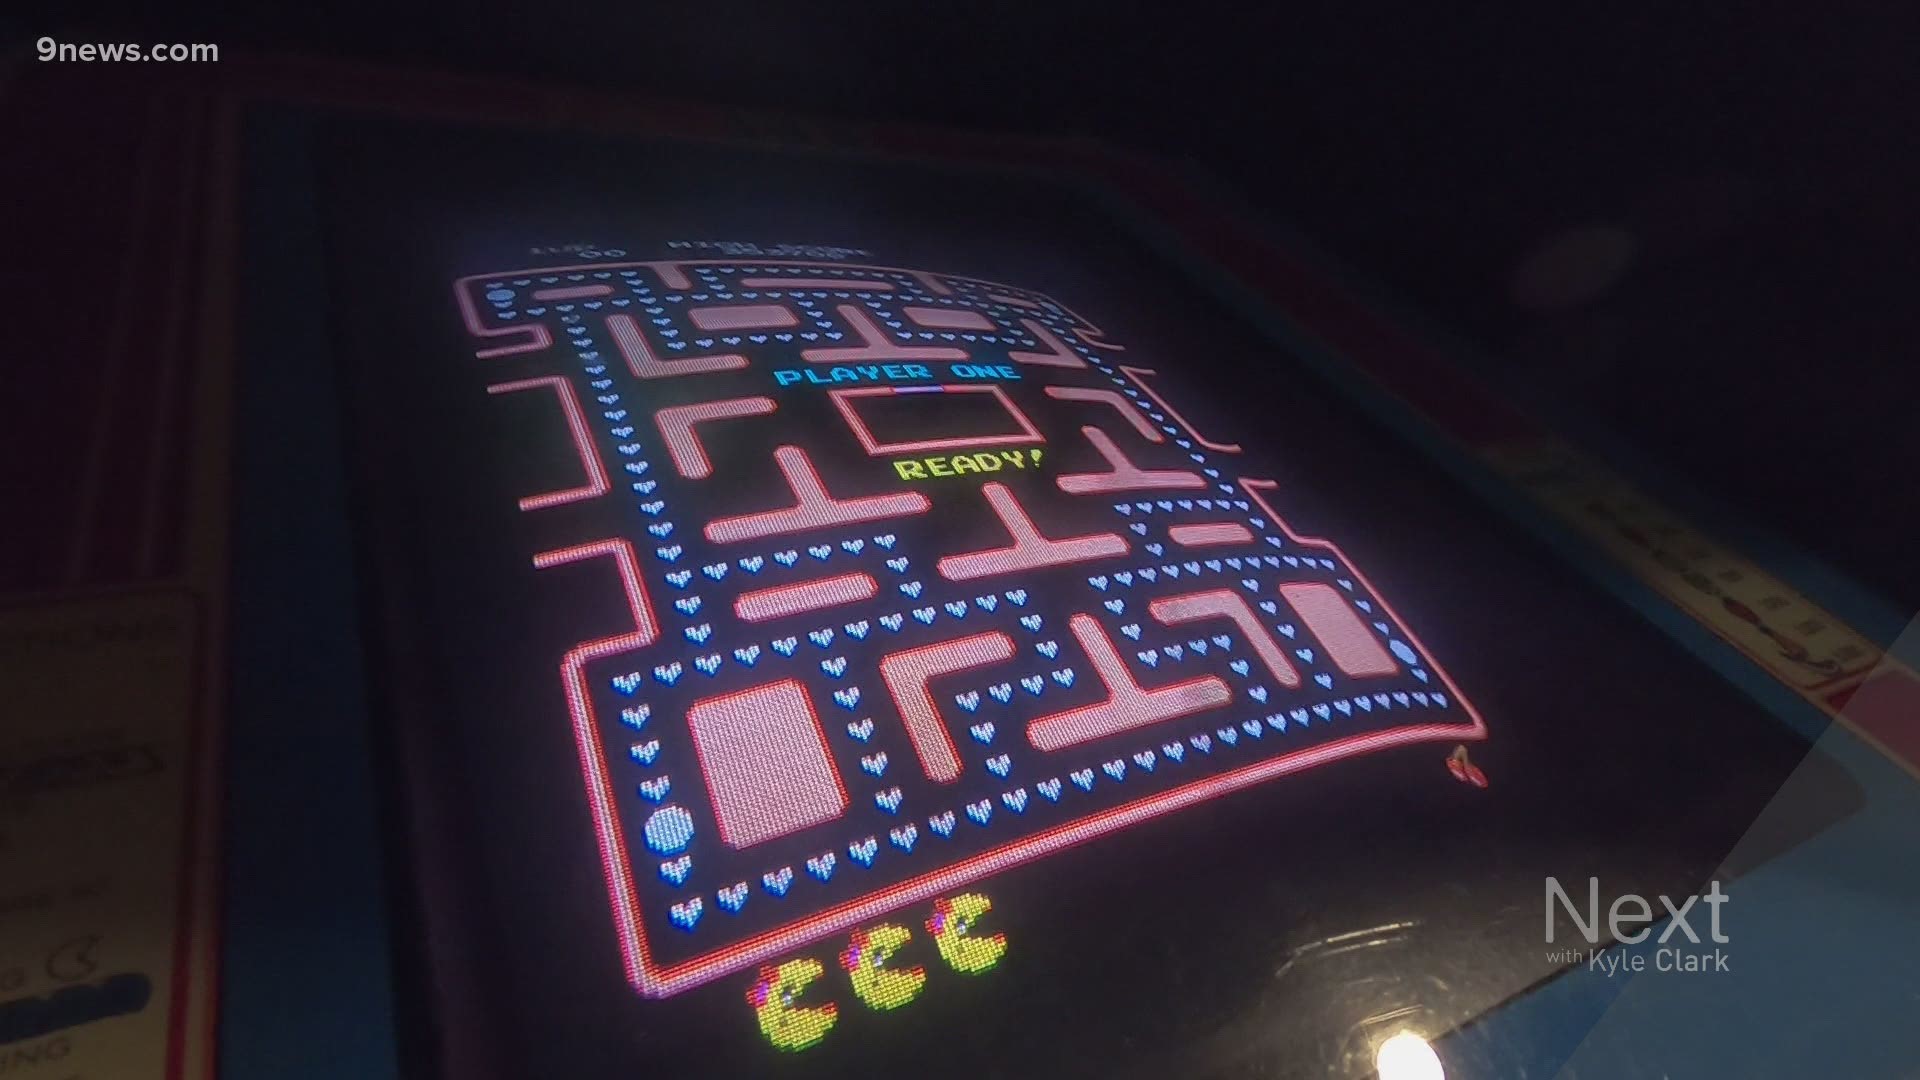 Arcade bars like 1UP, in Denver, had to shut off their games because of coronavirus health restrictions. With some new adjustments, they can hit restart this week.